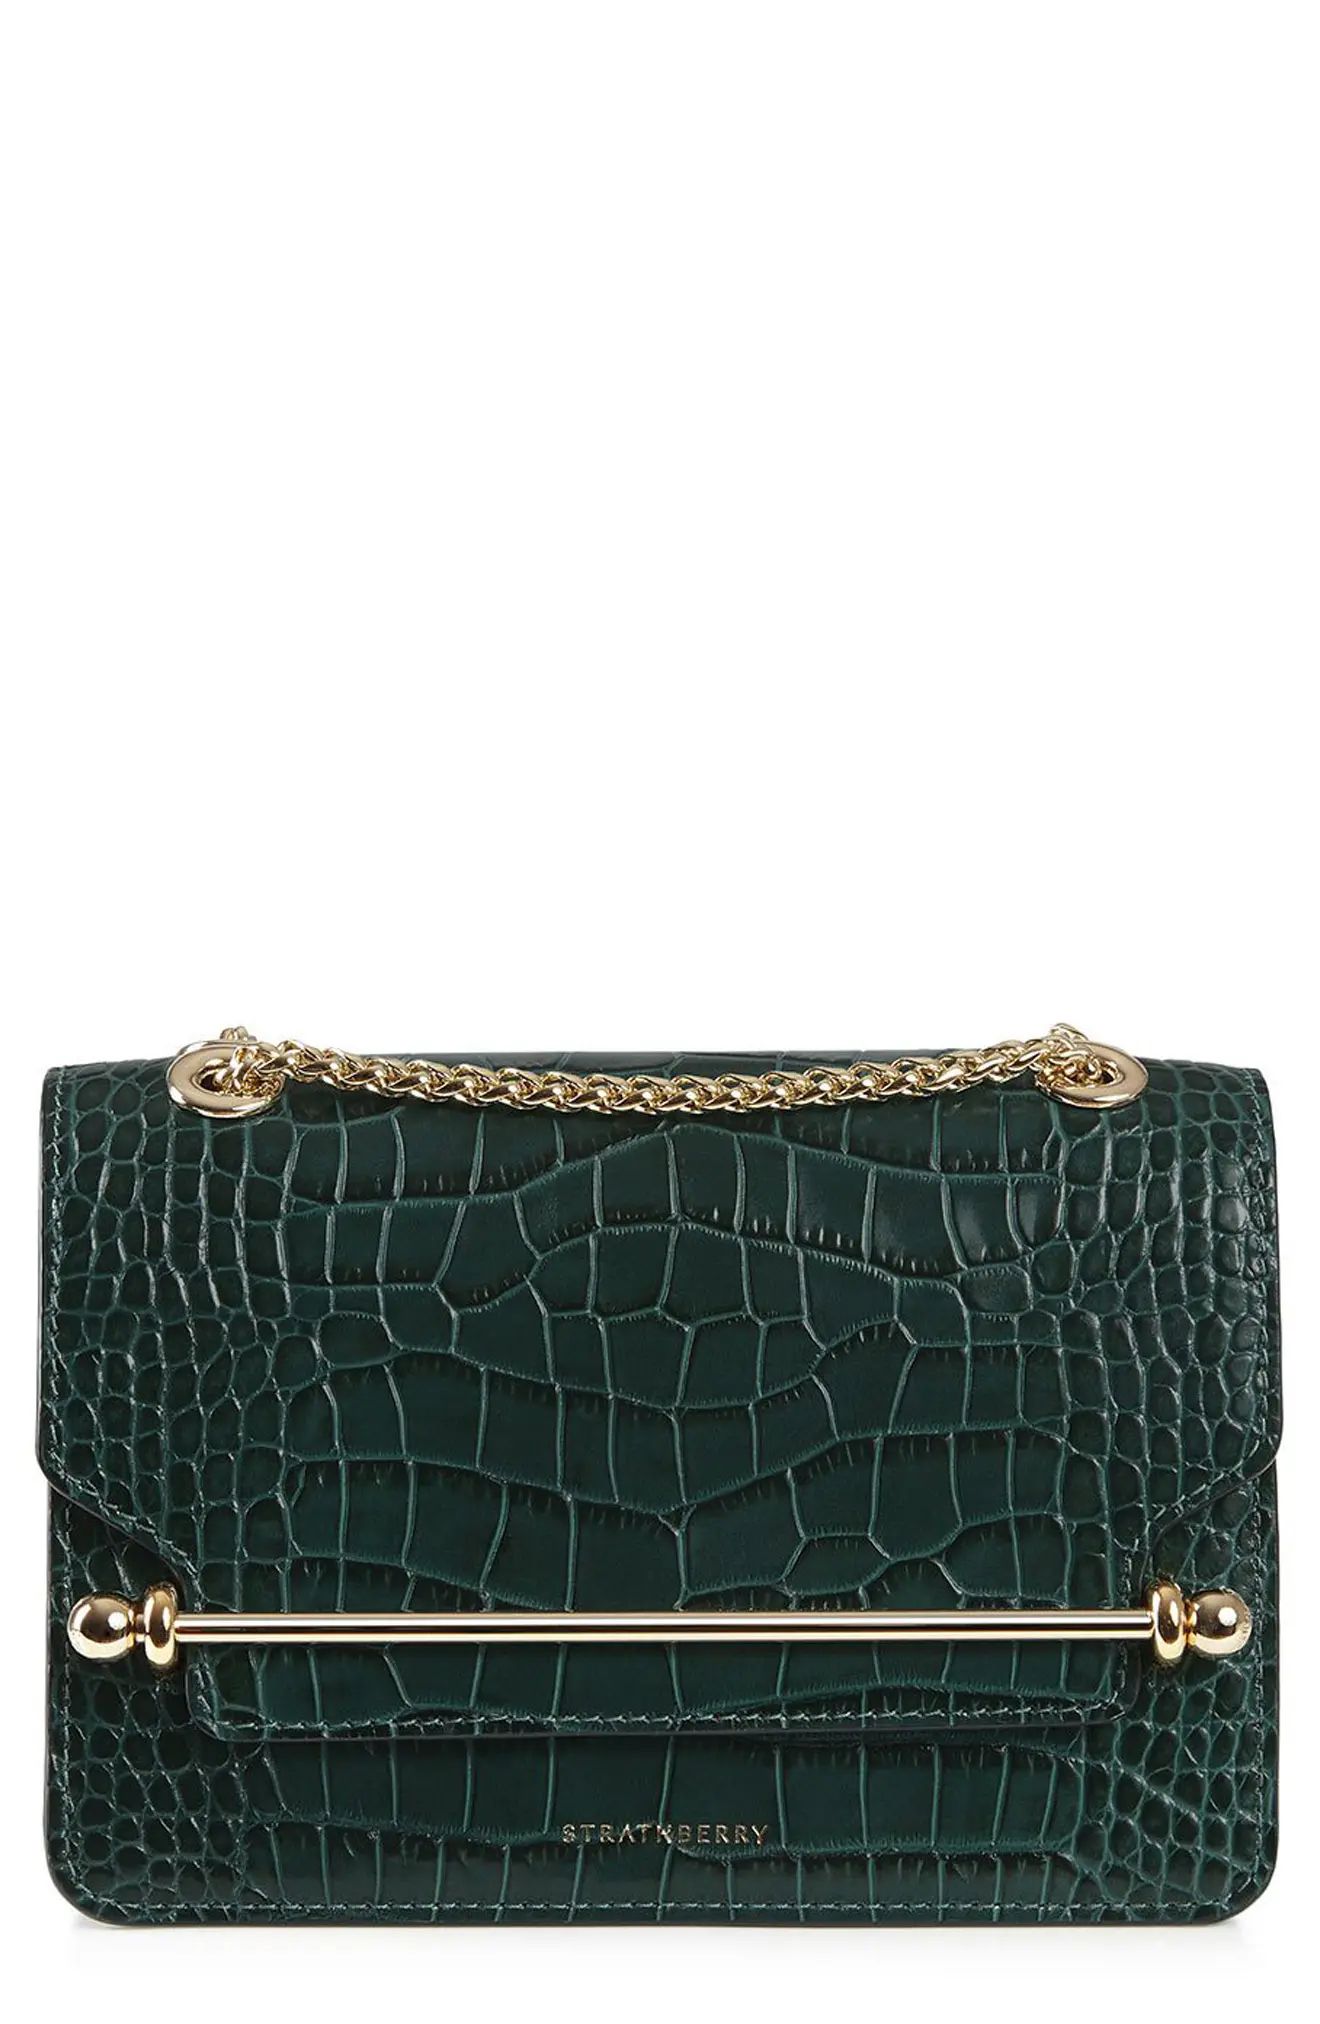 Strathberry Mini East/West Croc Embossed Leather Crossbody Bag in Bottle Green at Nordstrom | Nordstrom